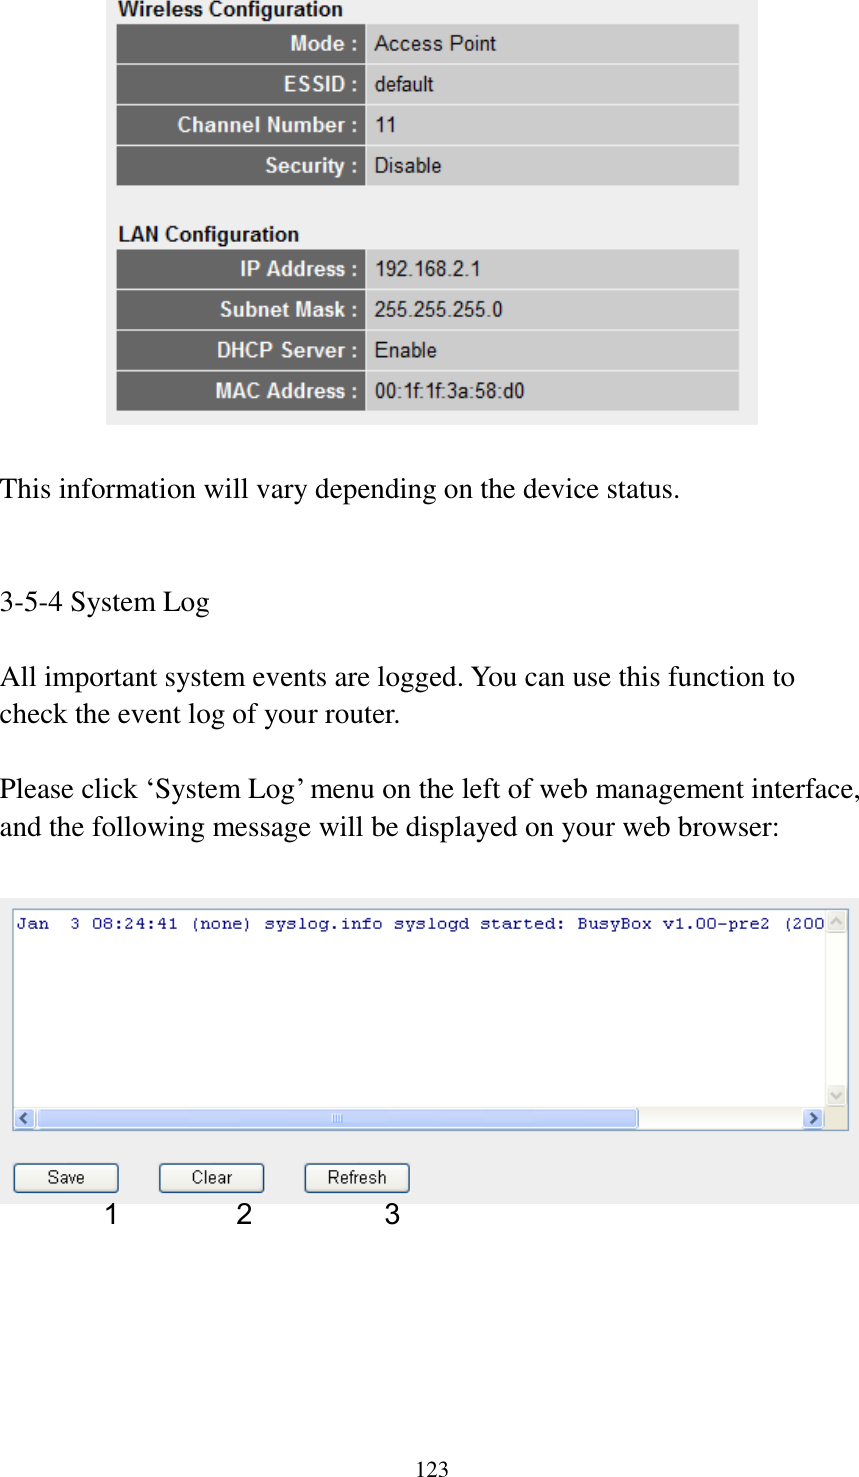 123   This information will vary depending on the device status.   3-5-4 System Log  All important system events are logged. You can use this function to check the event log of your router.  Please click „System Log‟ menu on the left of web management interface, and the following message will be displayed on your web browser:        1 2 3 